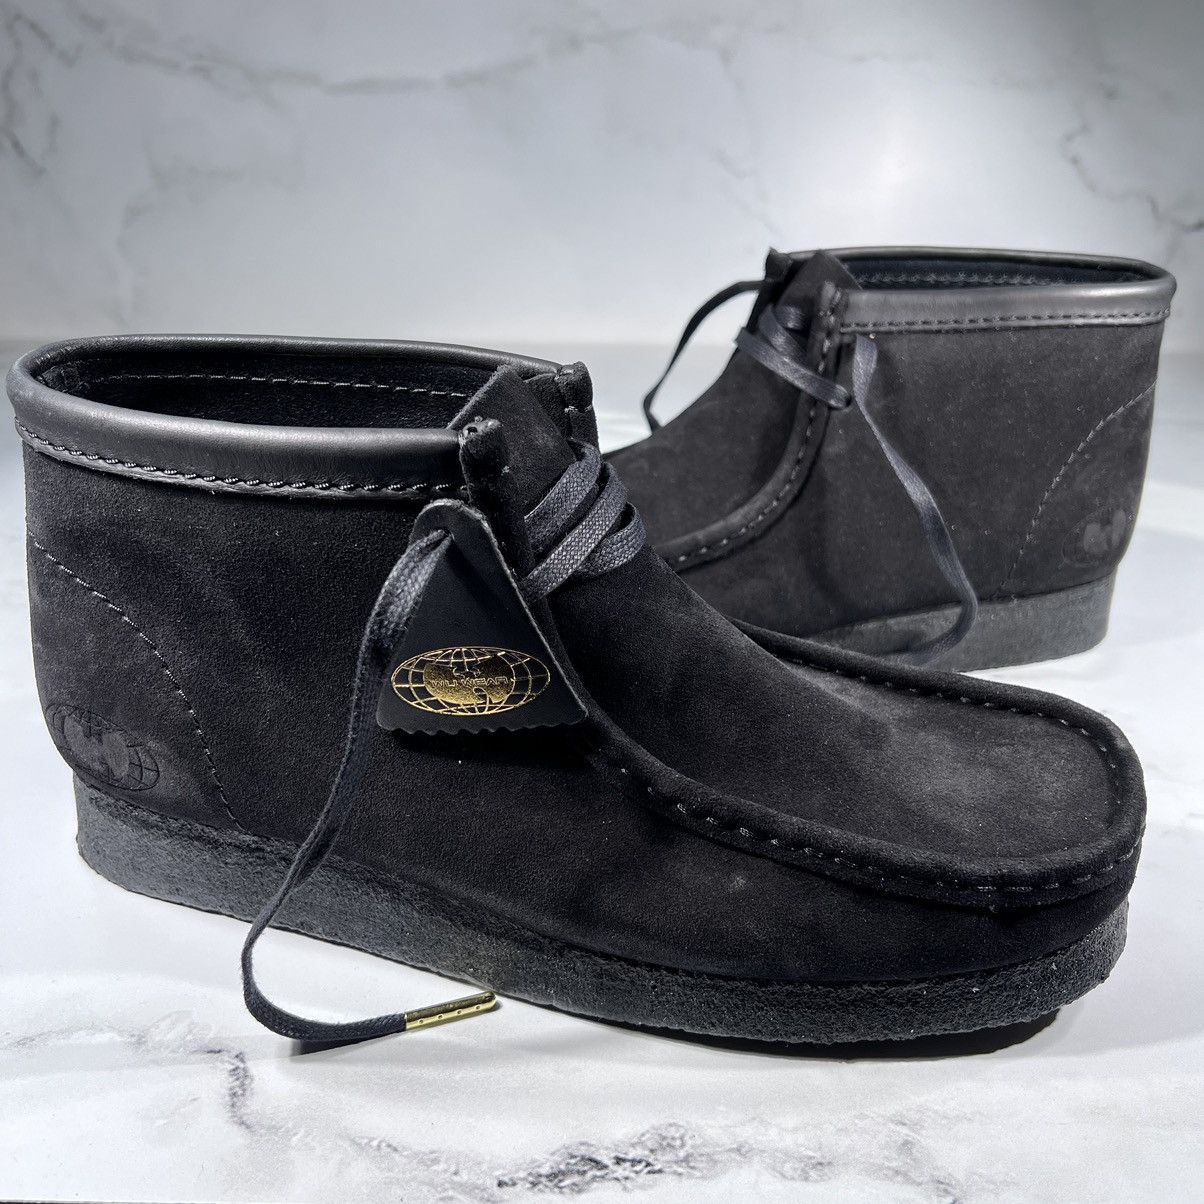 Clarks Originals x Wu Tang Clan Wallabee - Black - TheConnect860